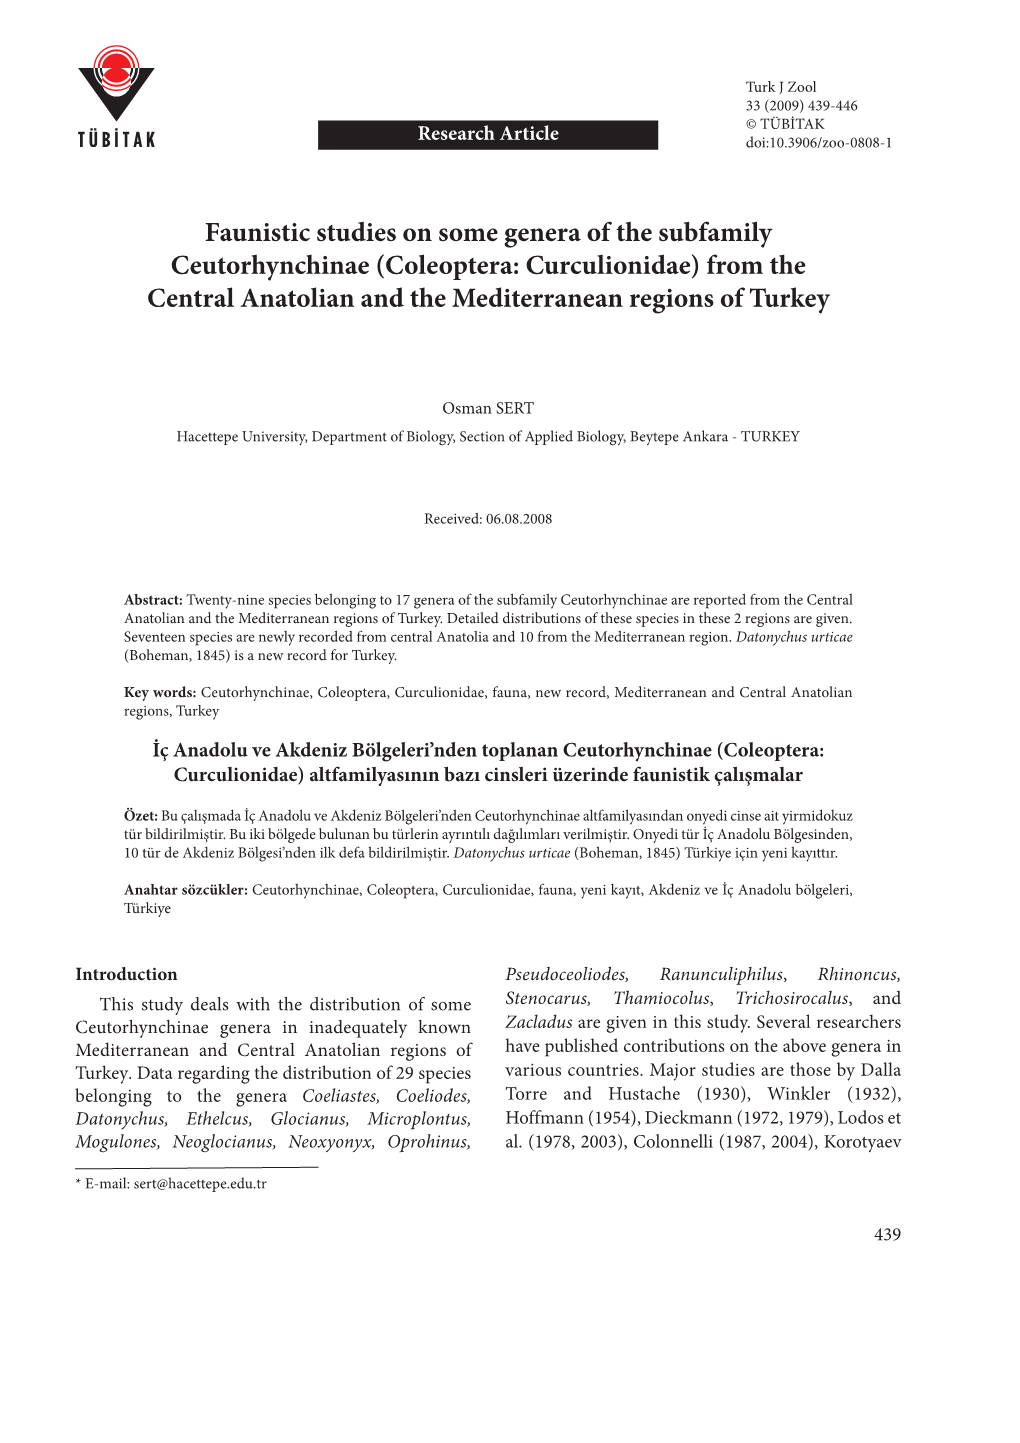 Faunistic Studies on Some Genera of the Subfamily Ceutorhynchinae (Coleoptera: Curculionidae) from the Central Anatolian and the Mediterranean Regions of Turkey